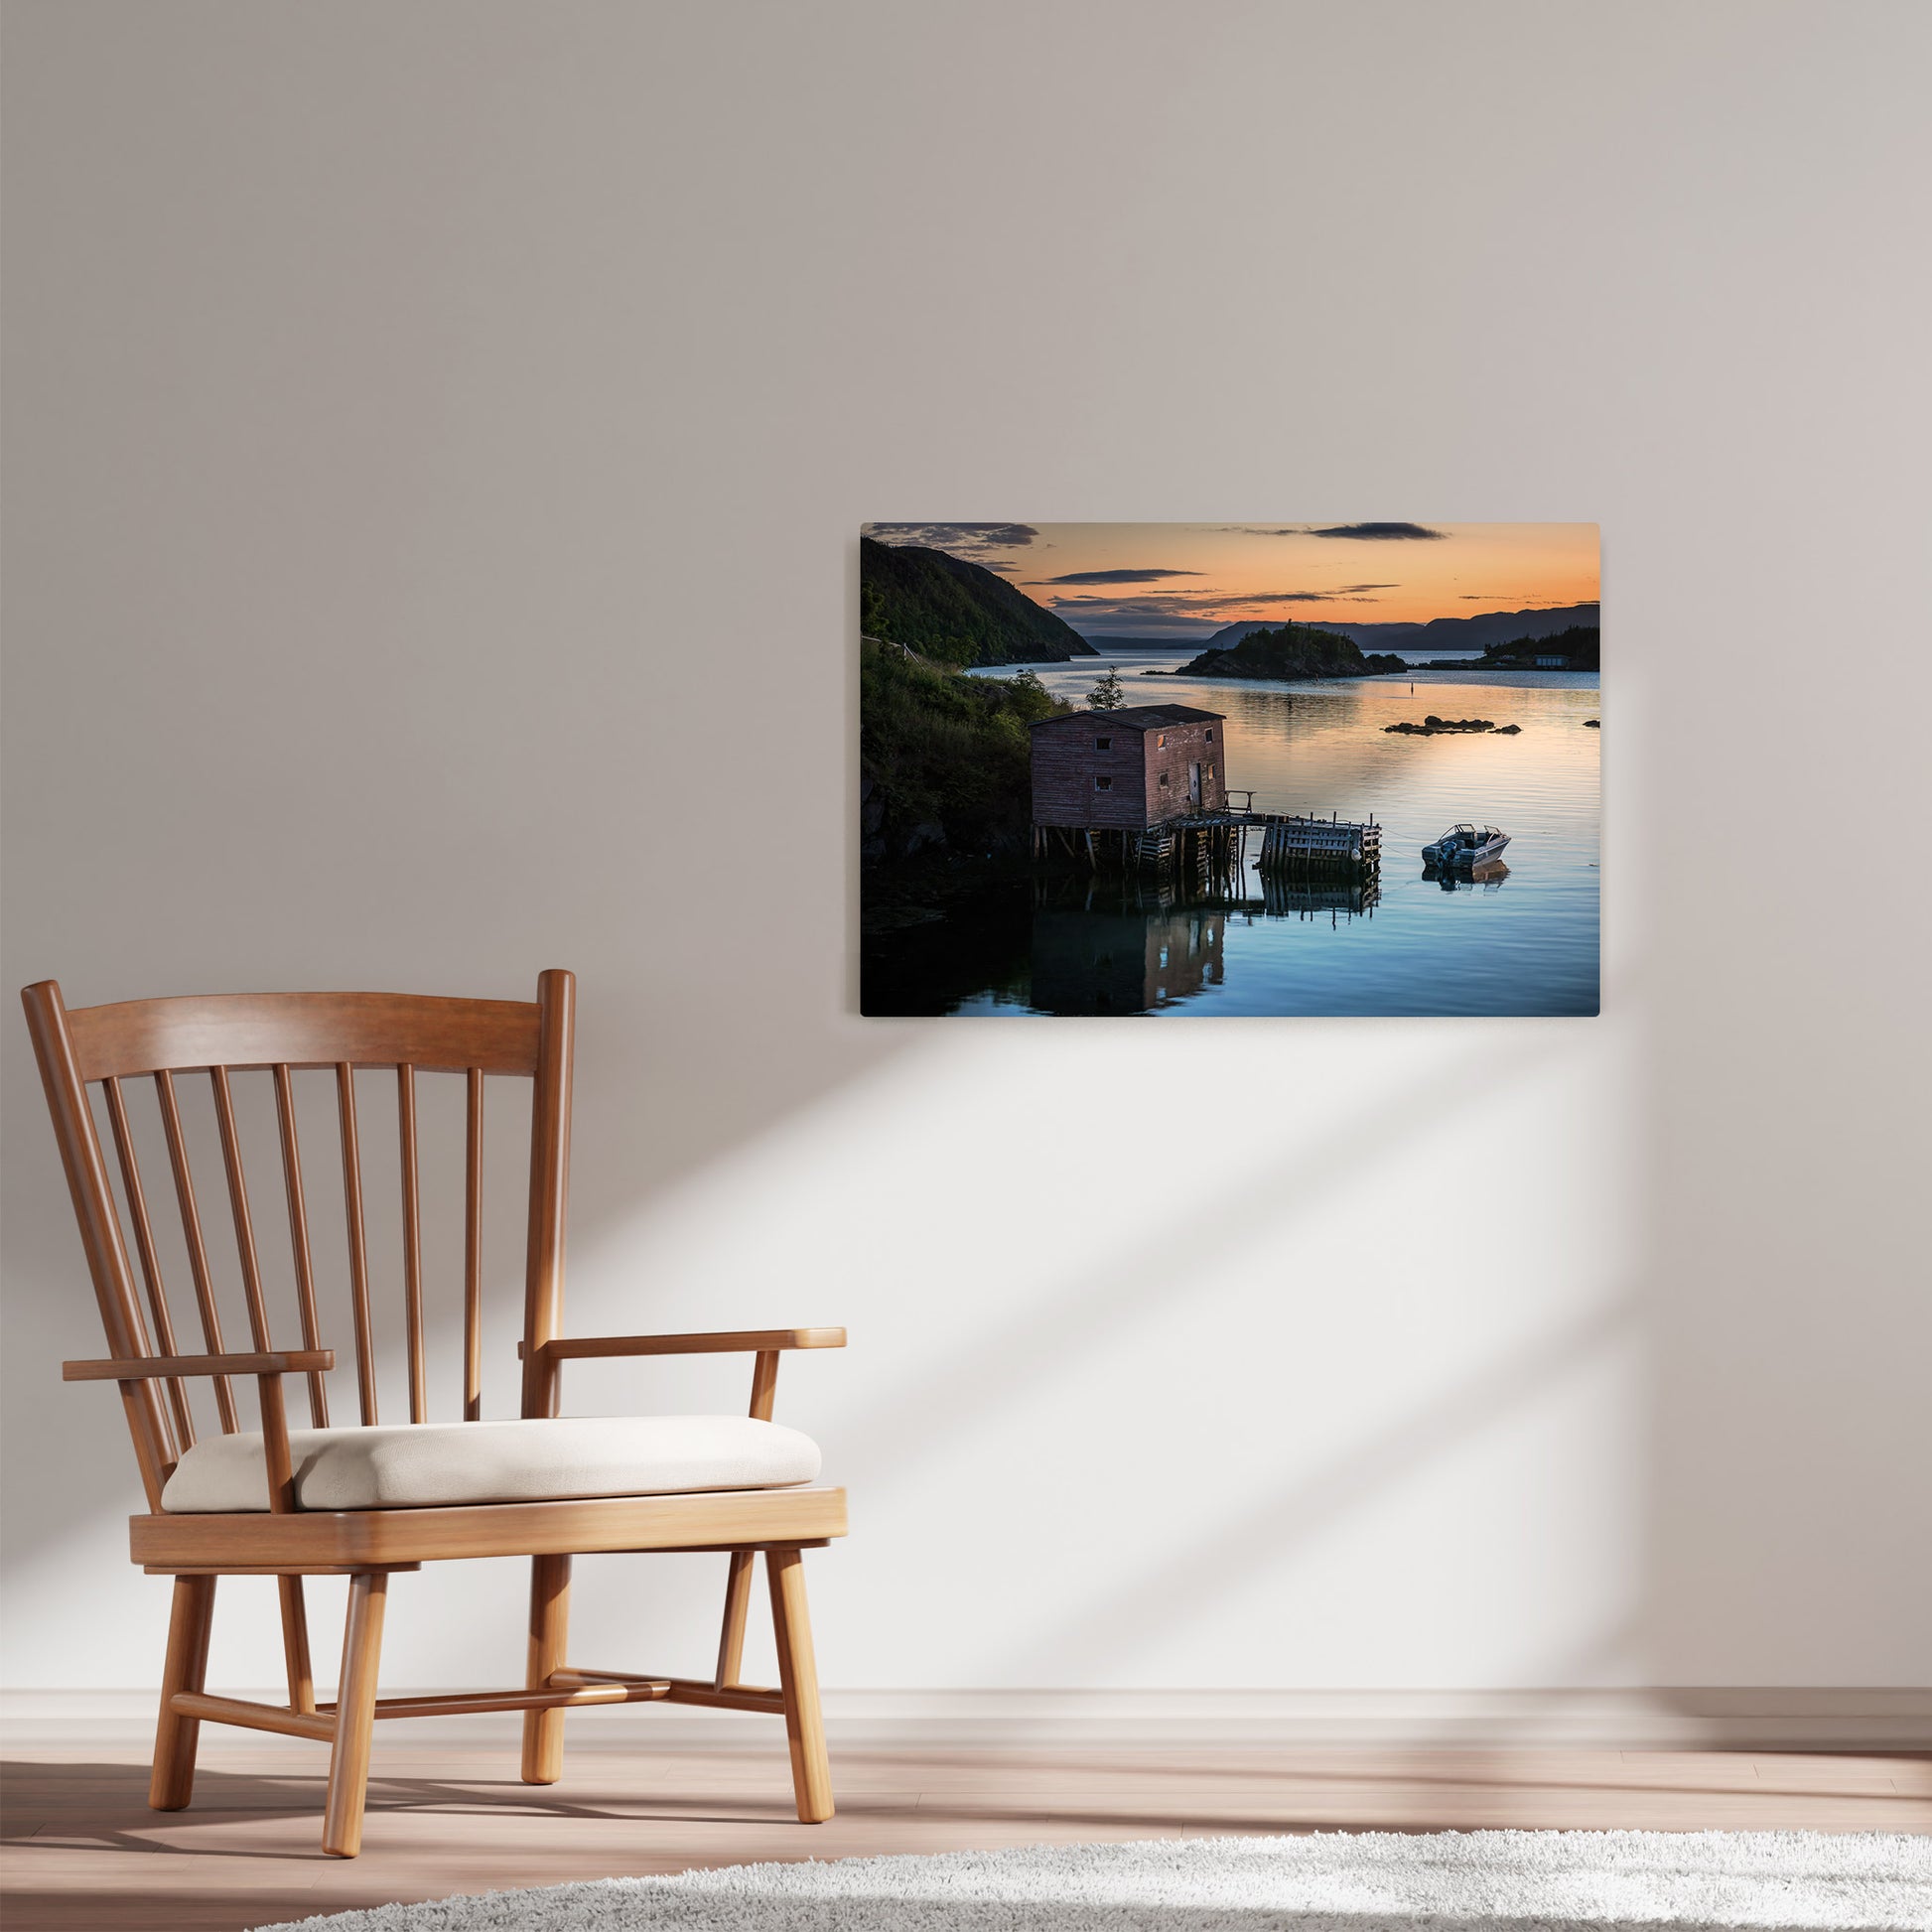 Ray Mackey's South Port photography reproduced on HD metal print and displayed on wall